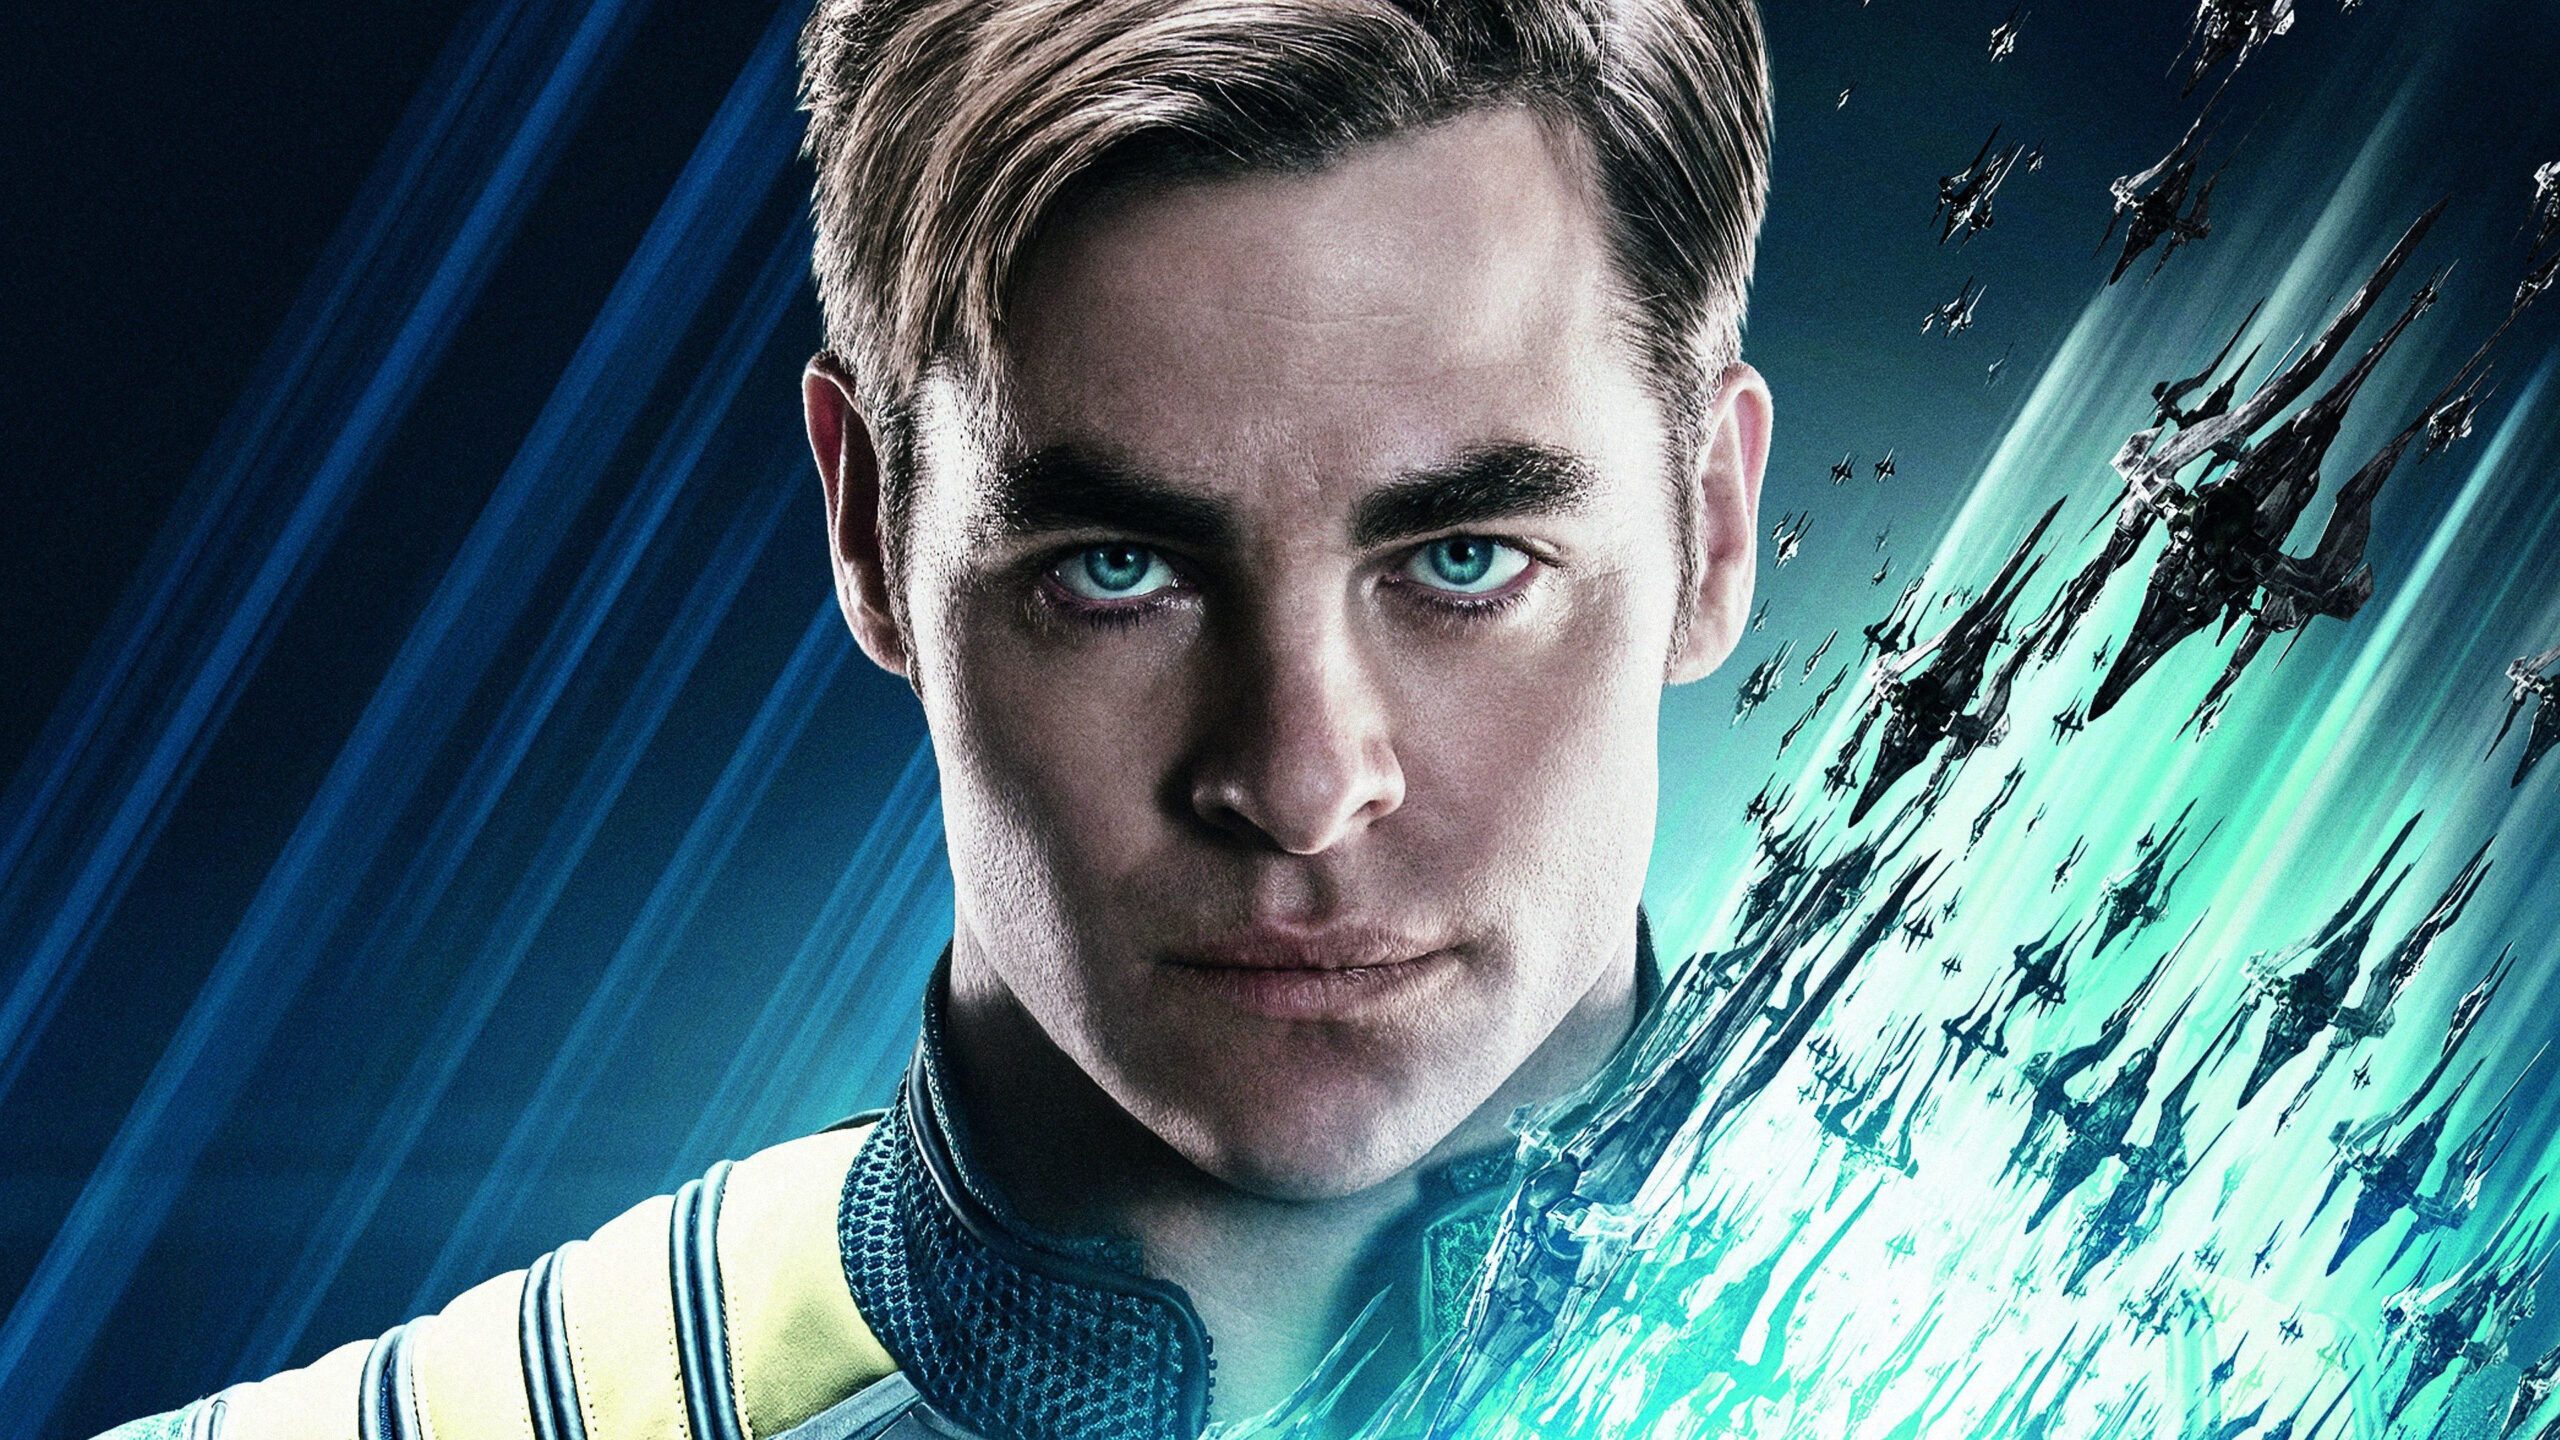 The Epic Chris Pine Fantasy Movie That's Now A Streaming Smash